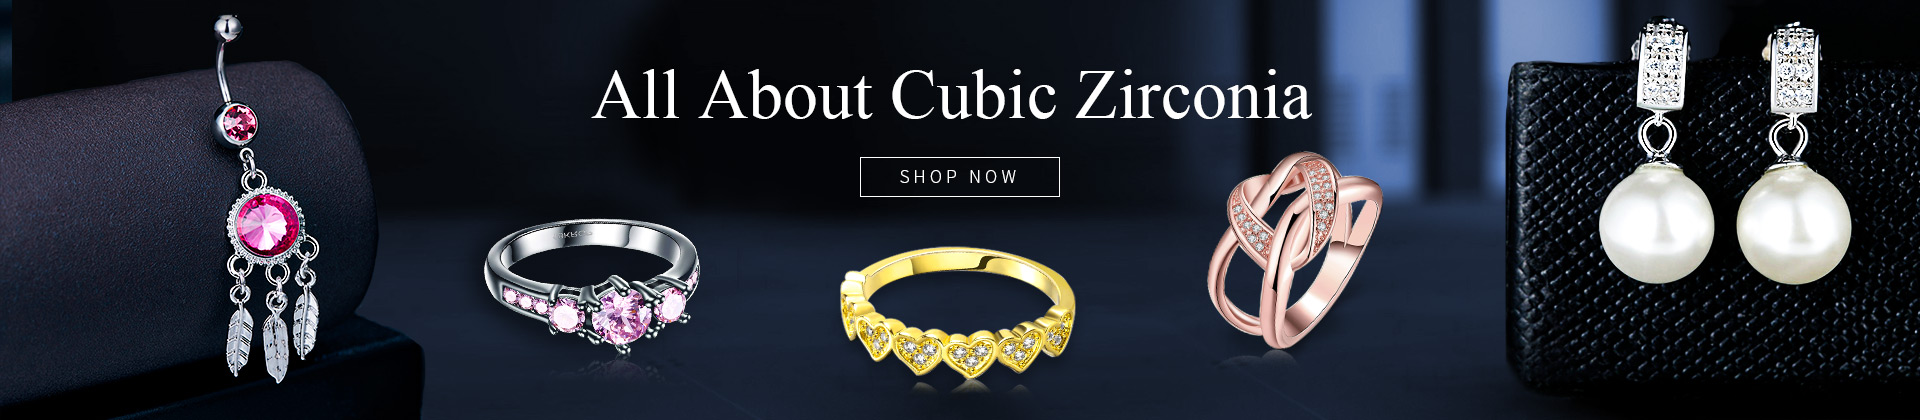 All About Cubic Zirconia